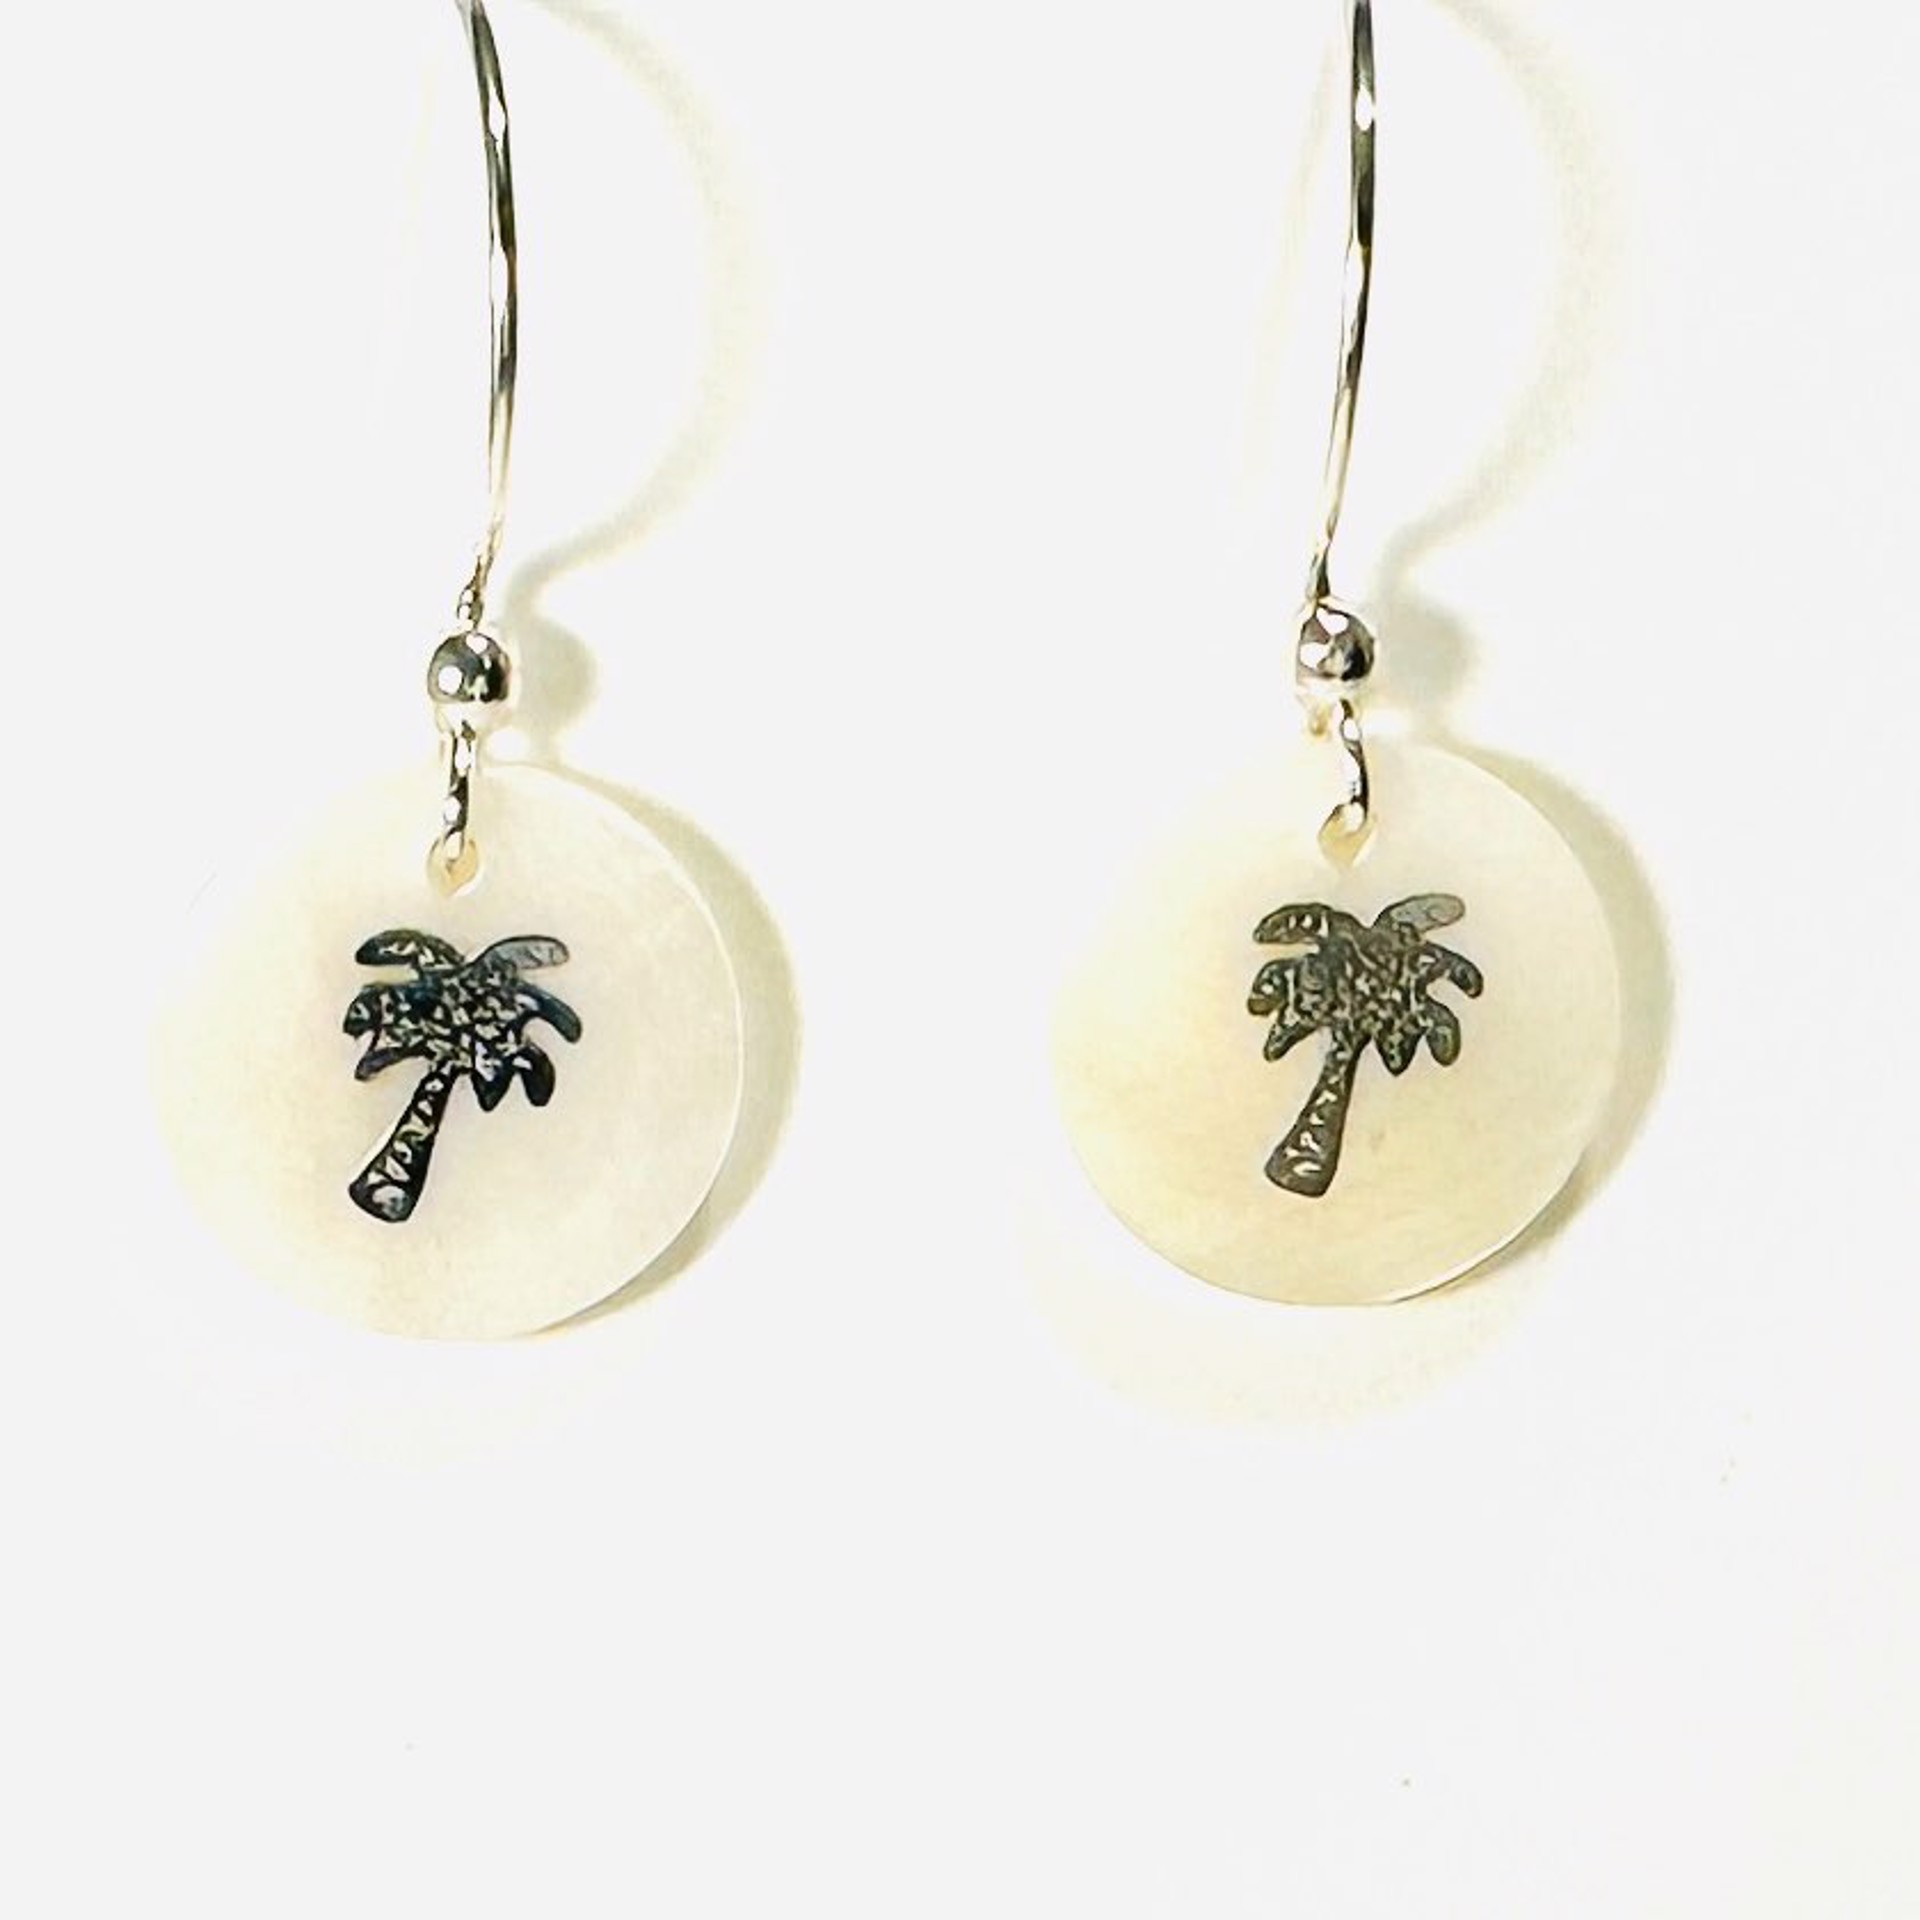 Mother of Pearl-Silver Palm Tree Earrings LR24-43 by Legare Riano